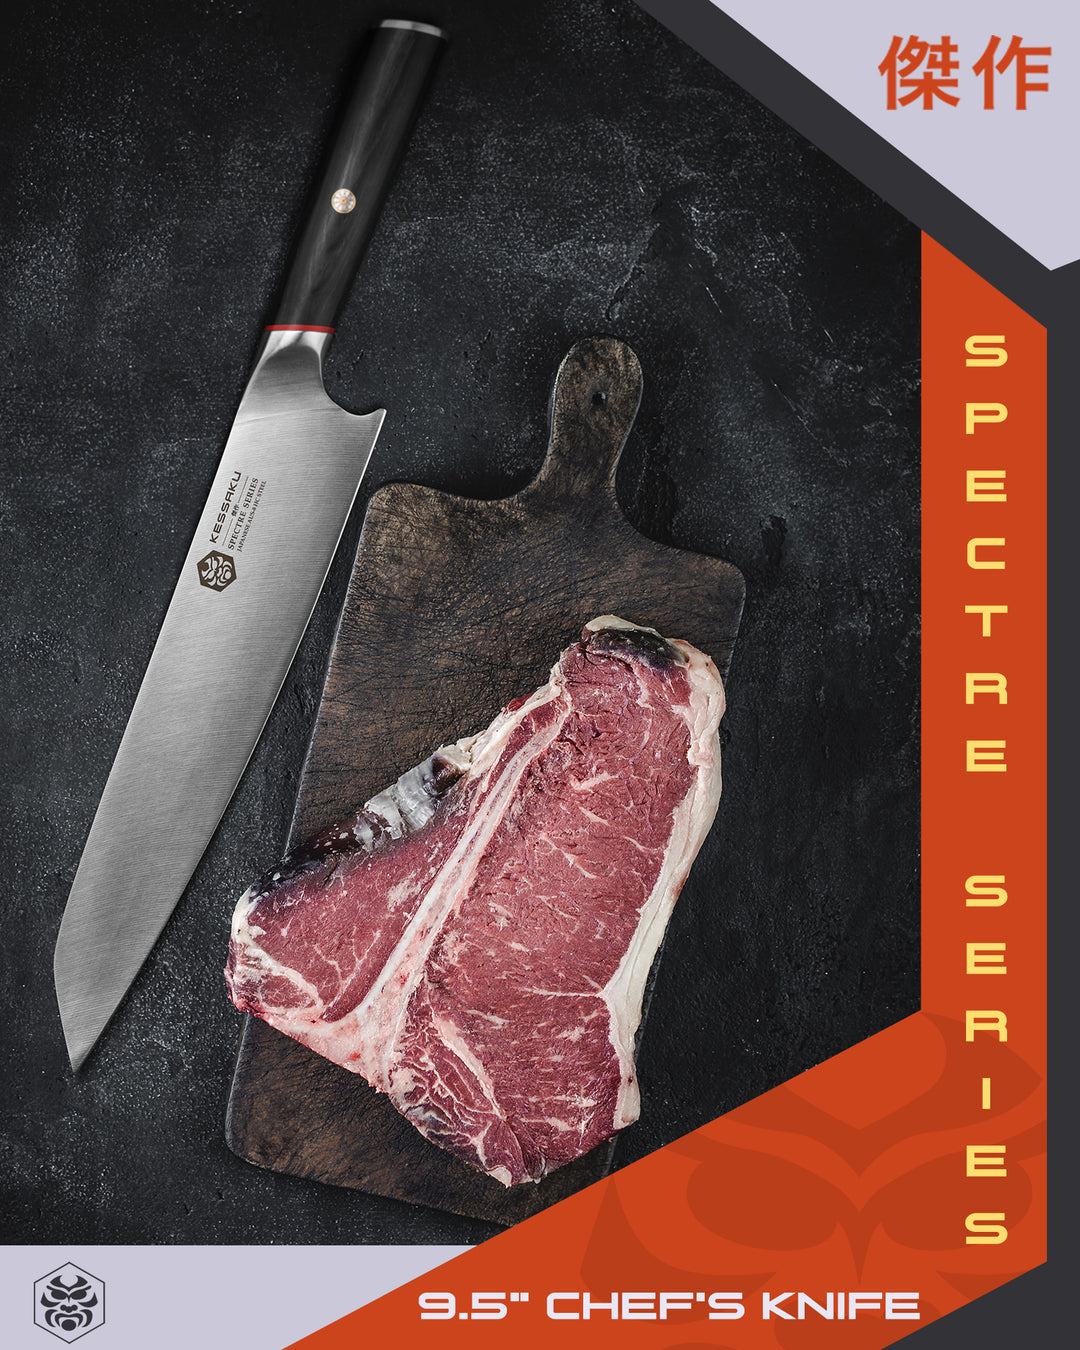 The Spectre K-Tip Chef's Knife and a partially trimmed t-bone steak